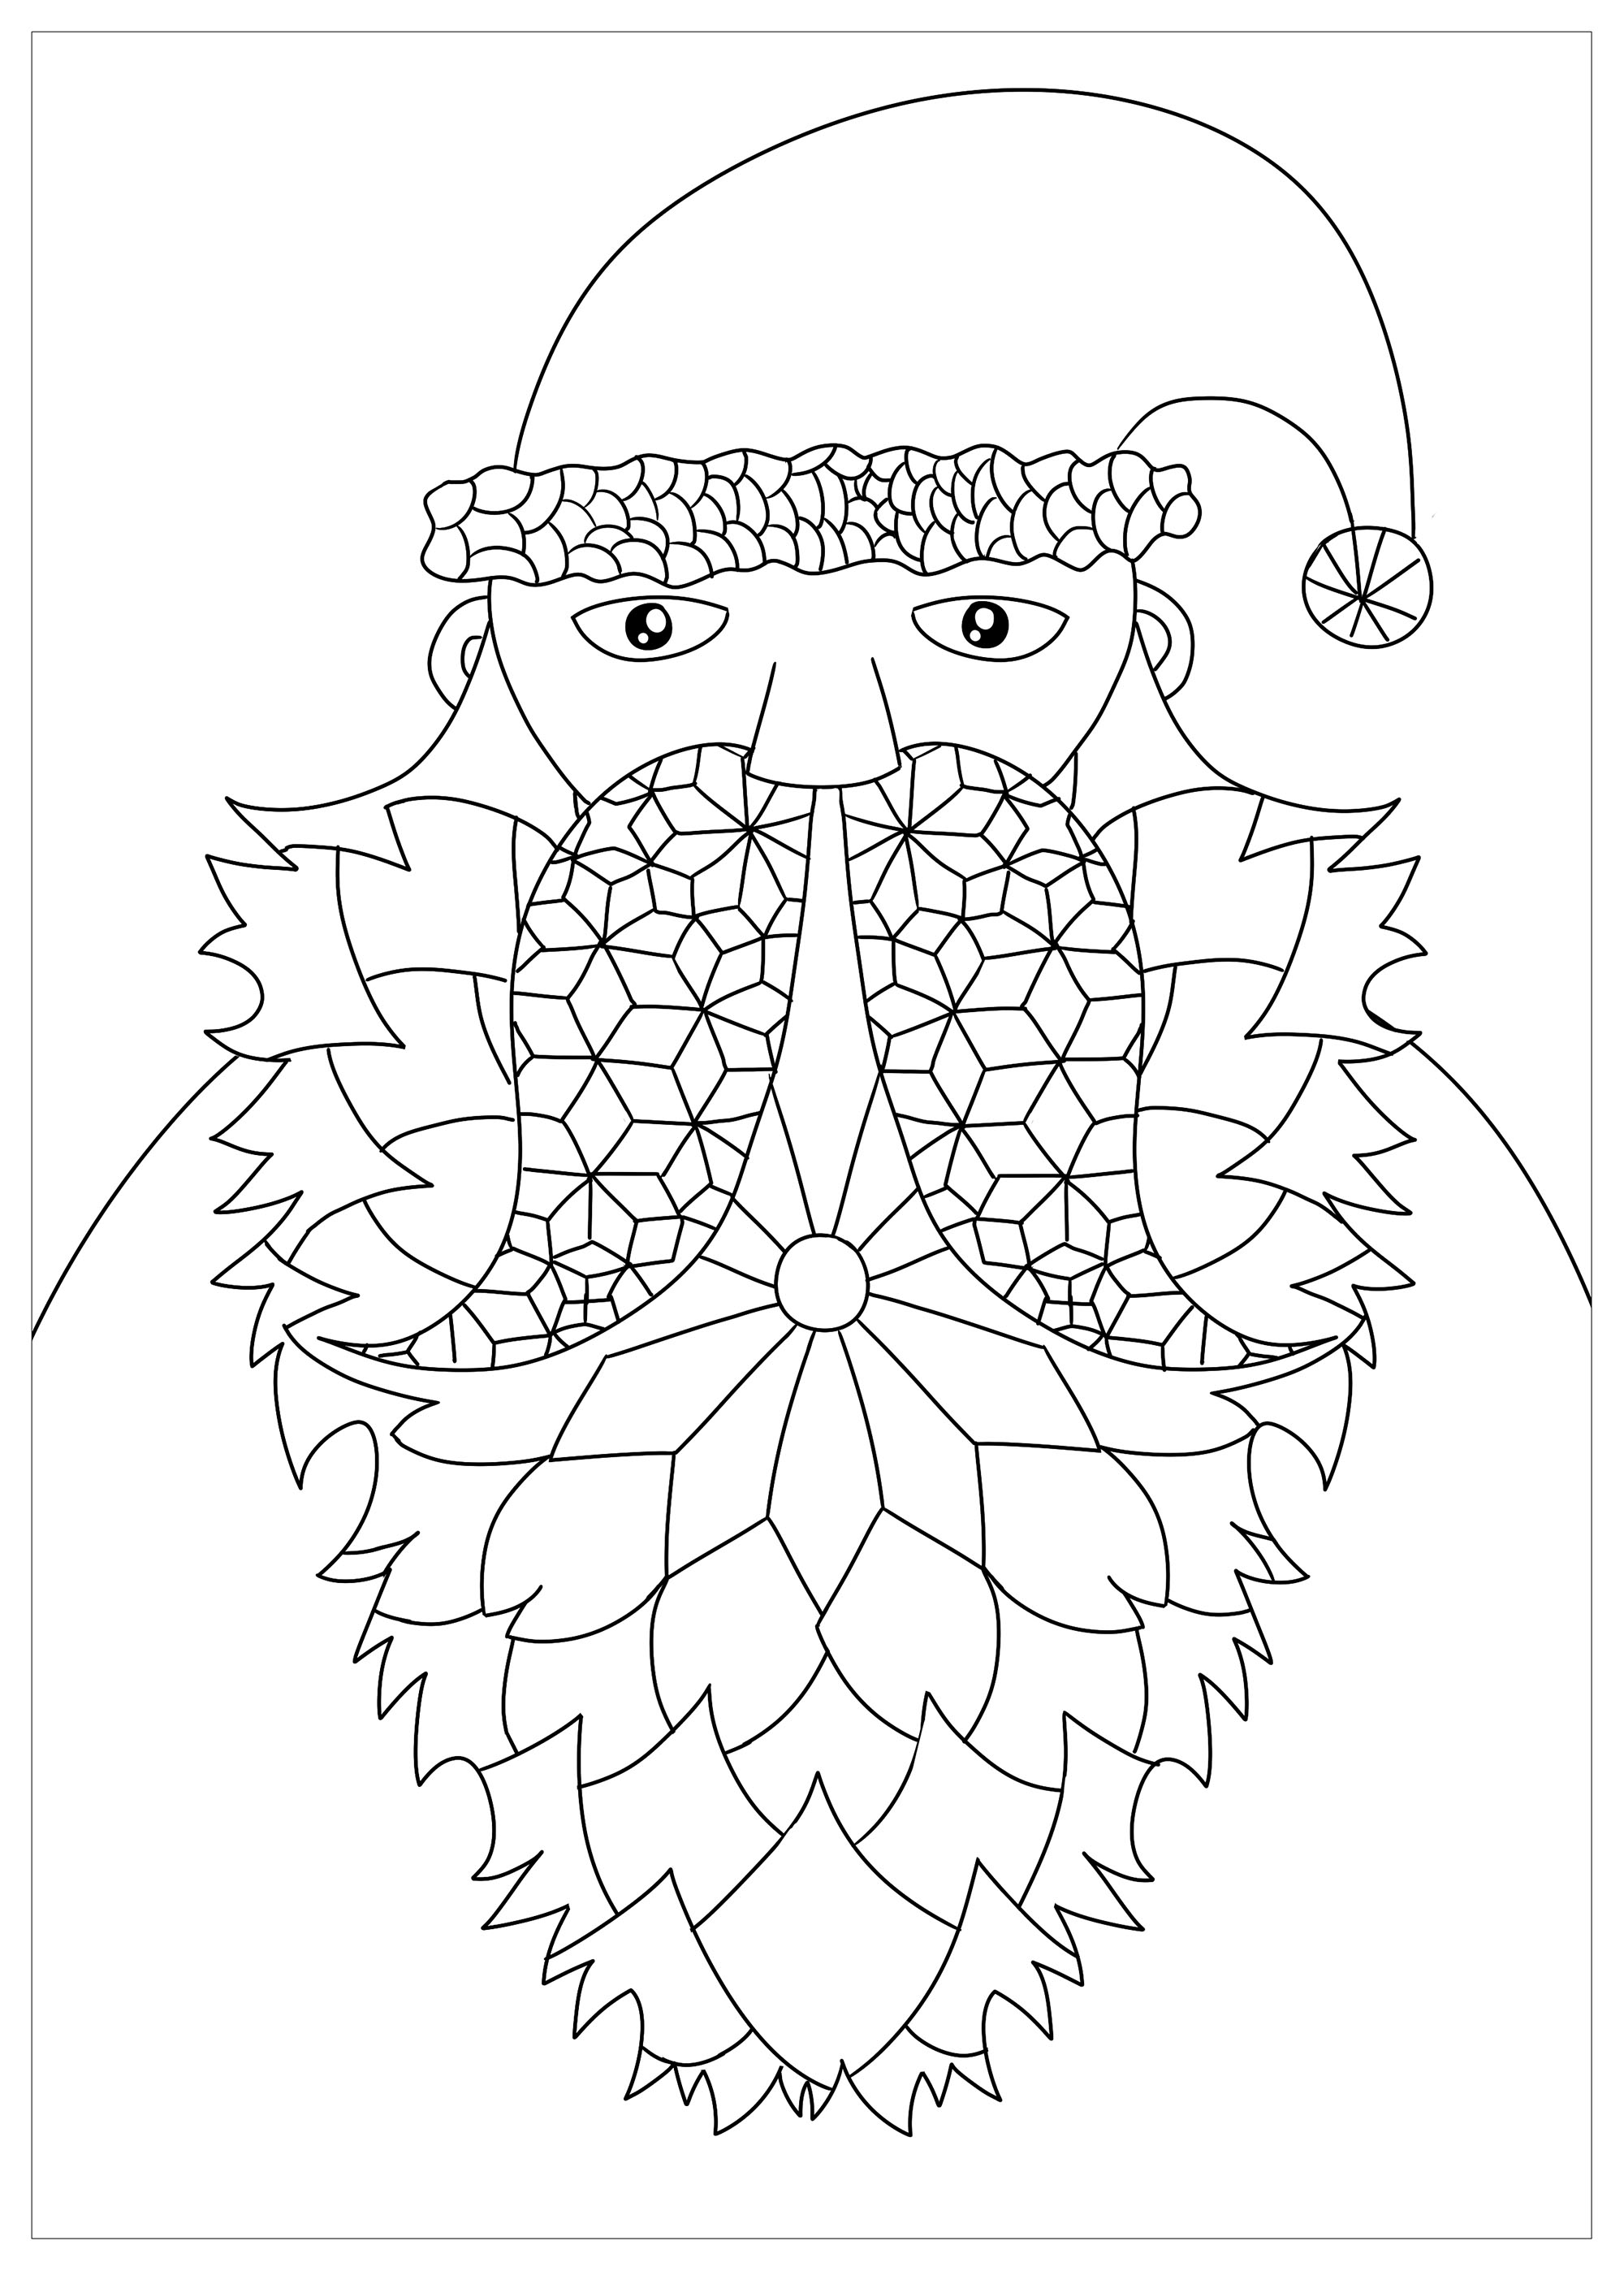 Santa Claus with a beard composed of geometric elements